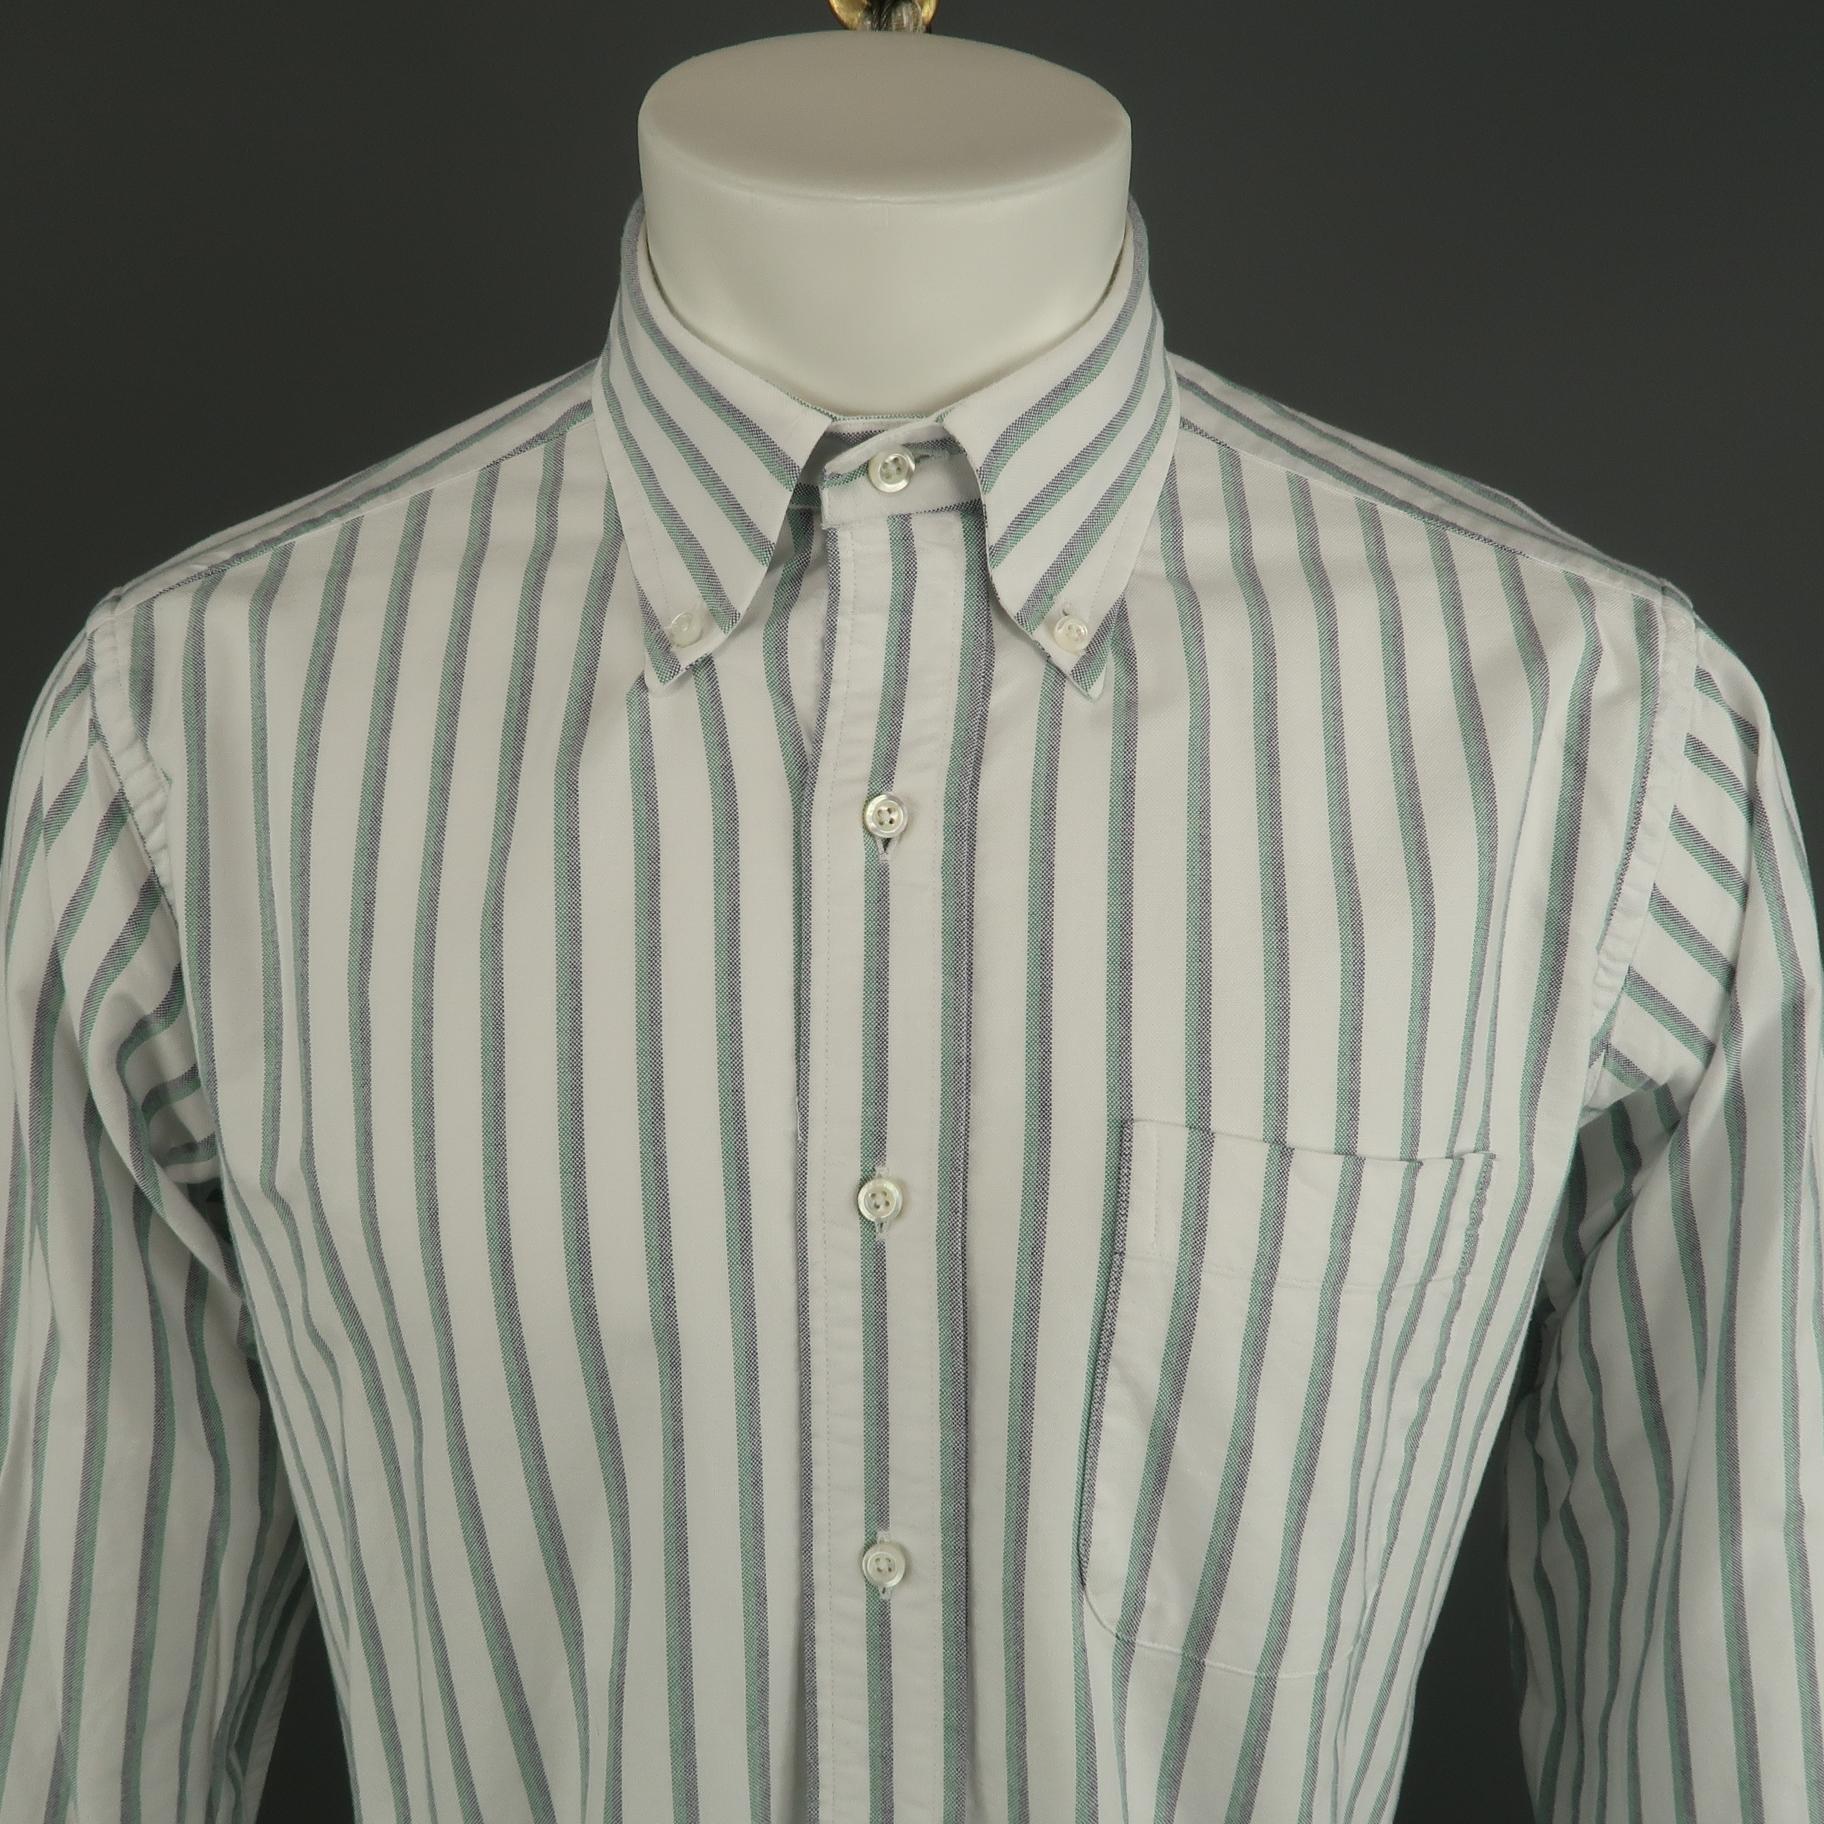 THOM BROWNE long sleeve shirt comes in a white and green stripe cotton featuring a button down collar style and a front patch pocket. Made in USA.
 
Excellent Pre-Owned Condition.
Marked: 4
 
Measurements:
 
Shoulder: 19 in.
Chest: 46 in.
Sleeve: